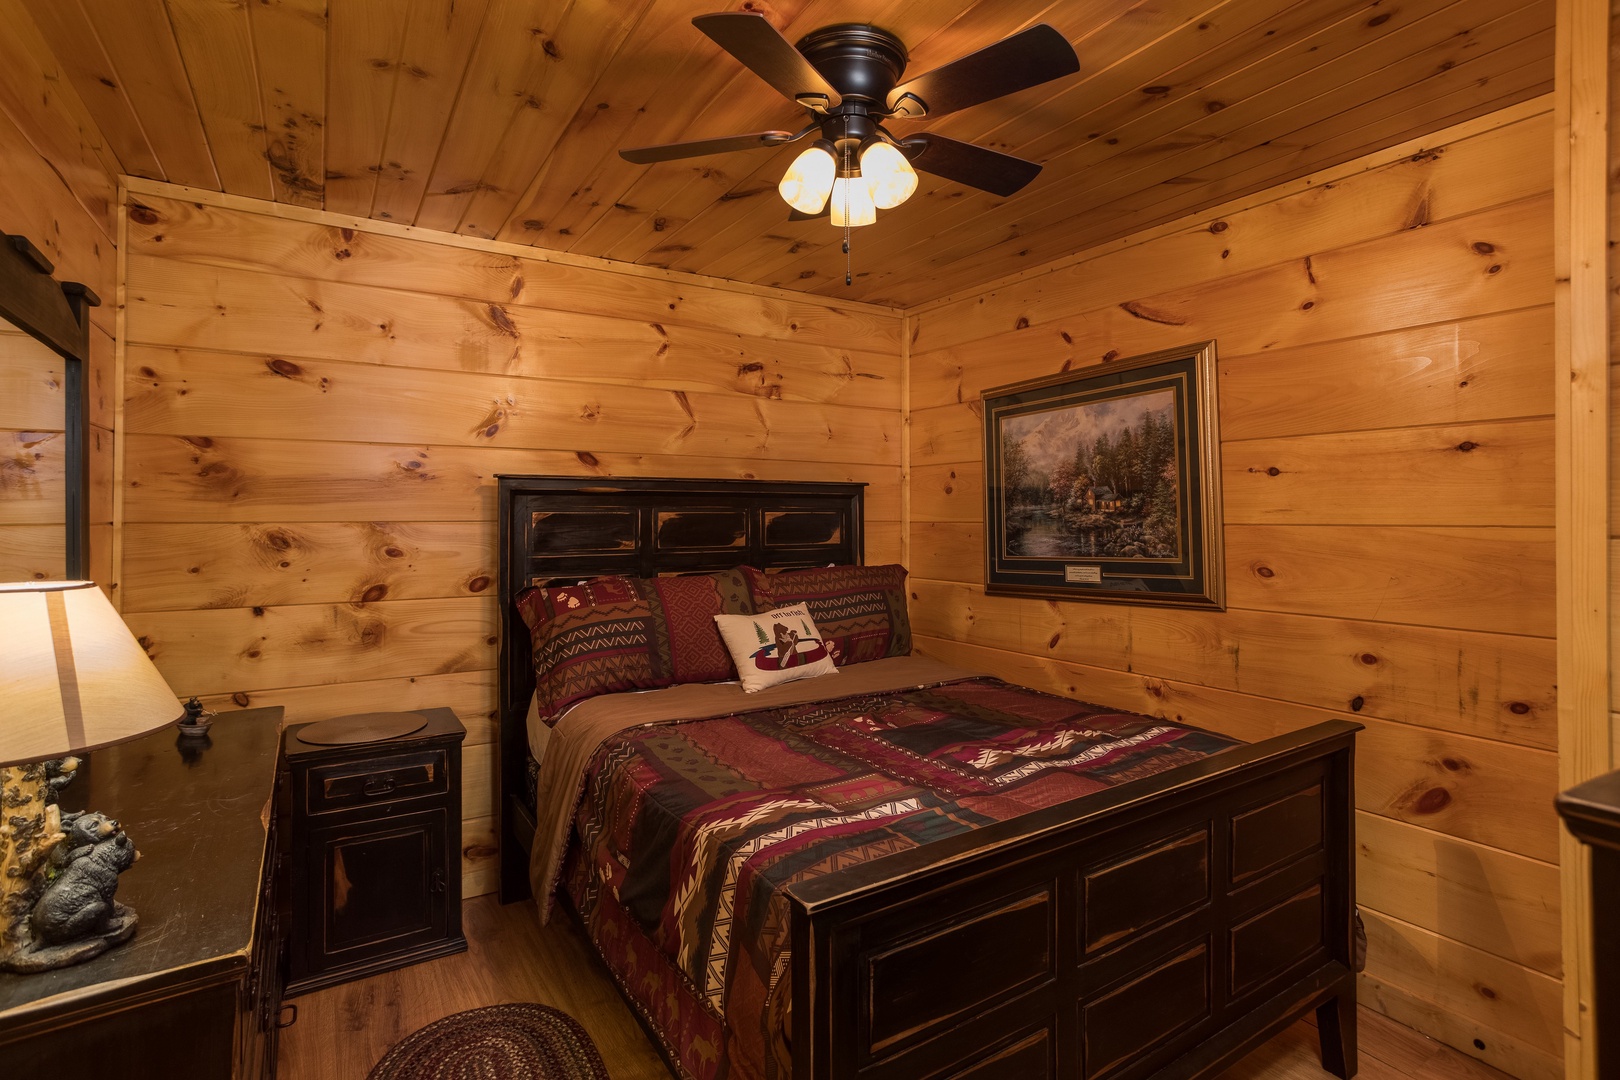 Bedroom with a bed, night stand, and dresser at Graceland, a 4-bedroom cabin rental located in Pigeon Forge